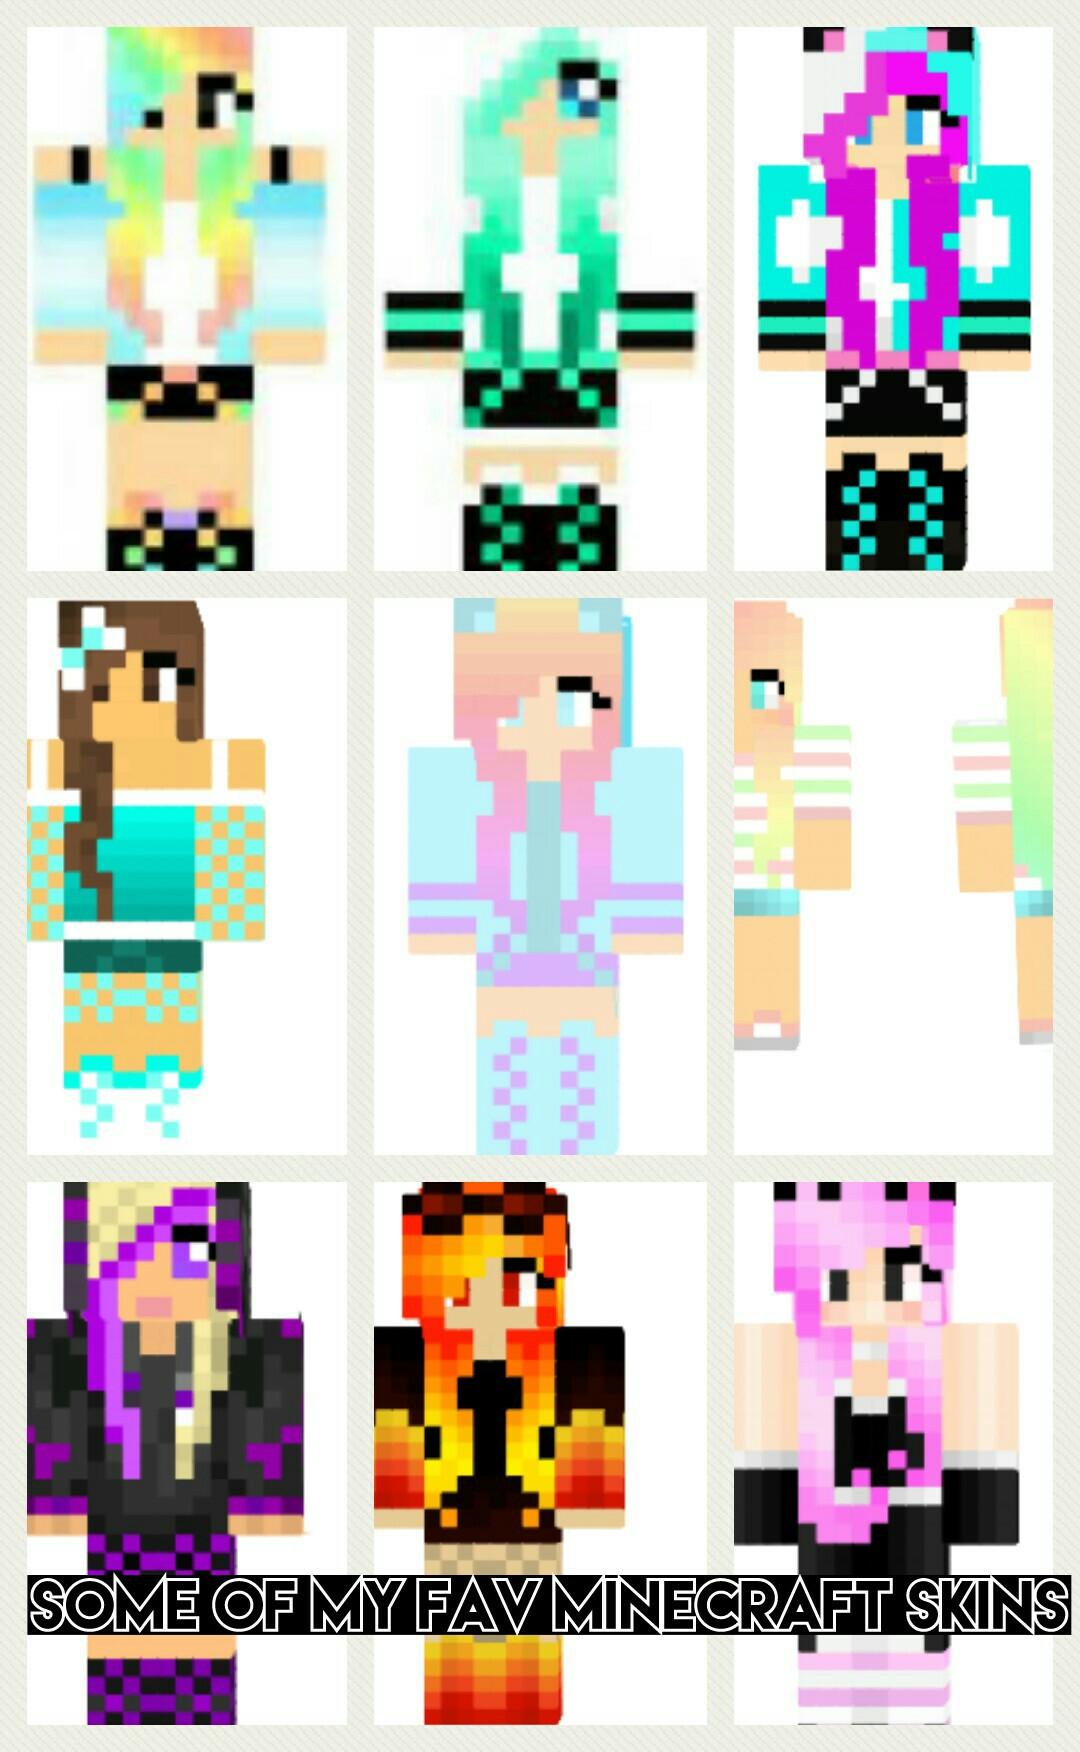 Some of my fav minecraft skins! what are ur favorite skins let me know by making remixes!